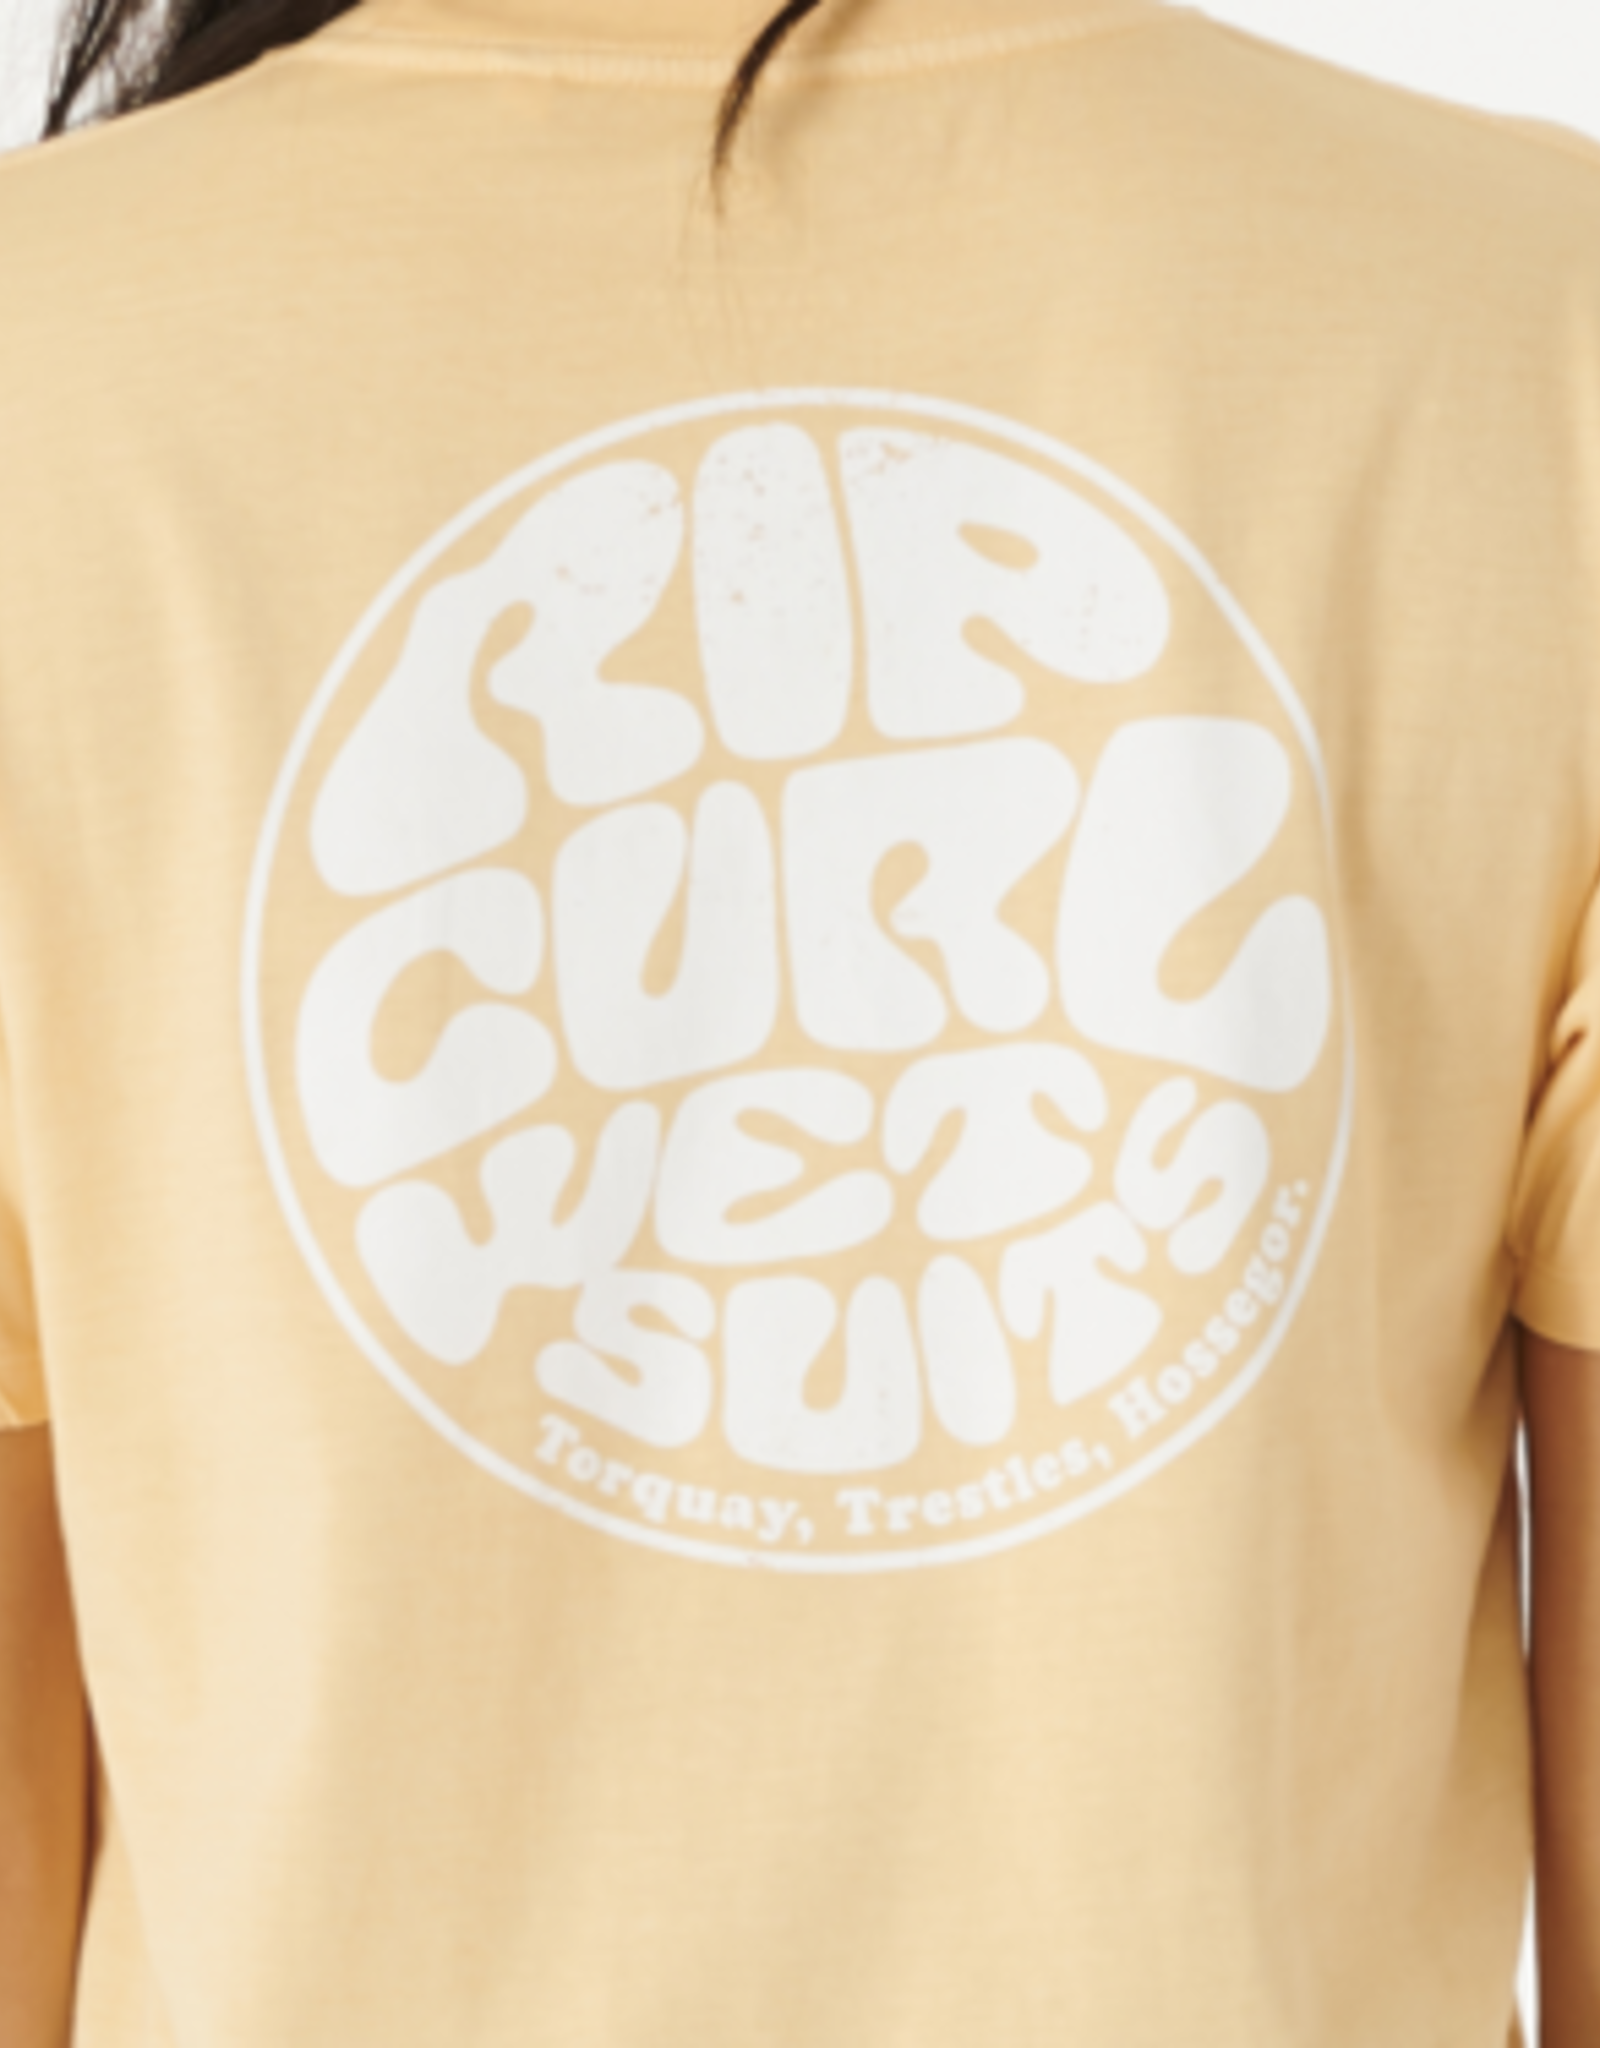 RIPCURL WETTIE ICON RELAXED TEE